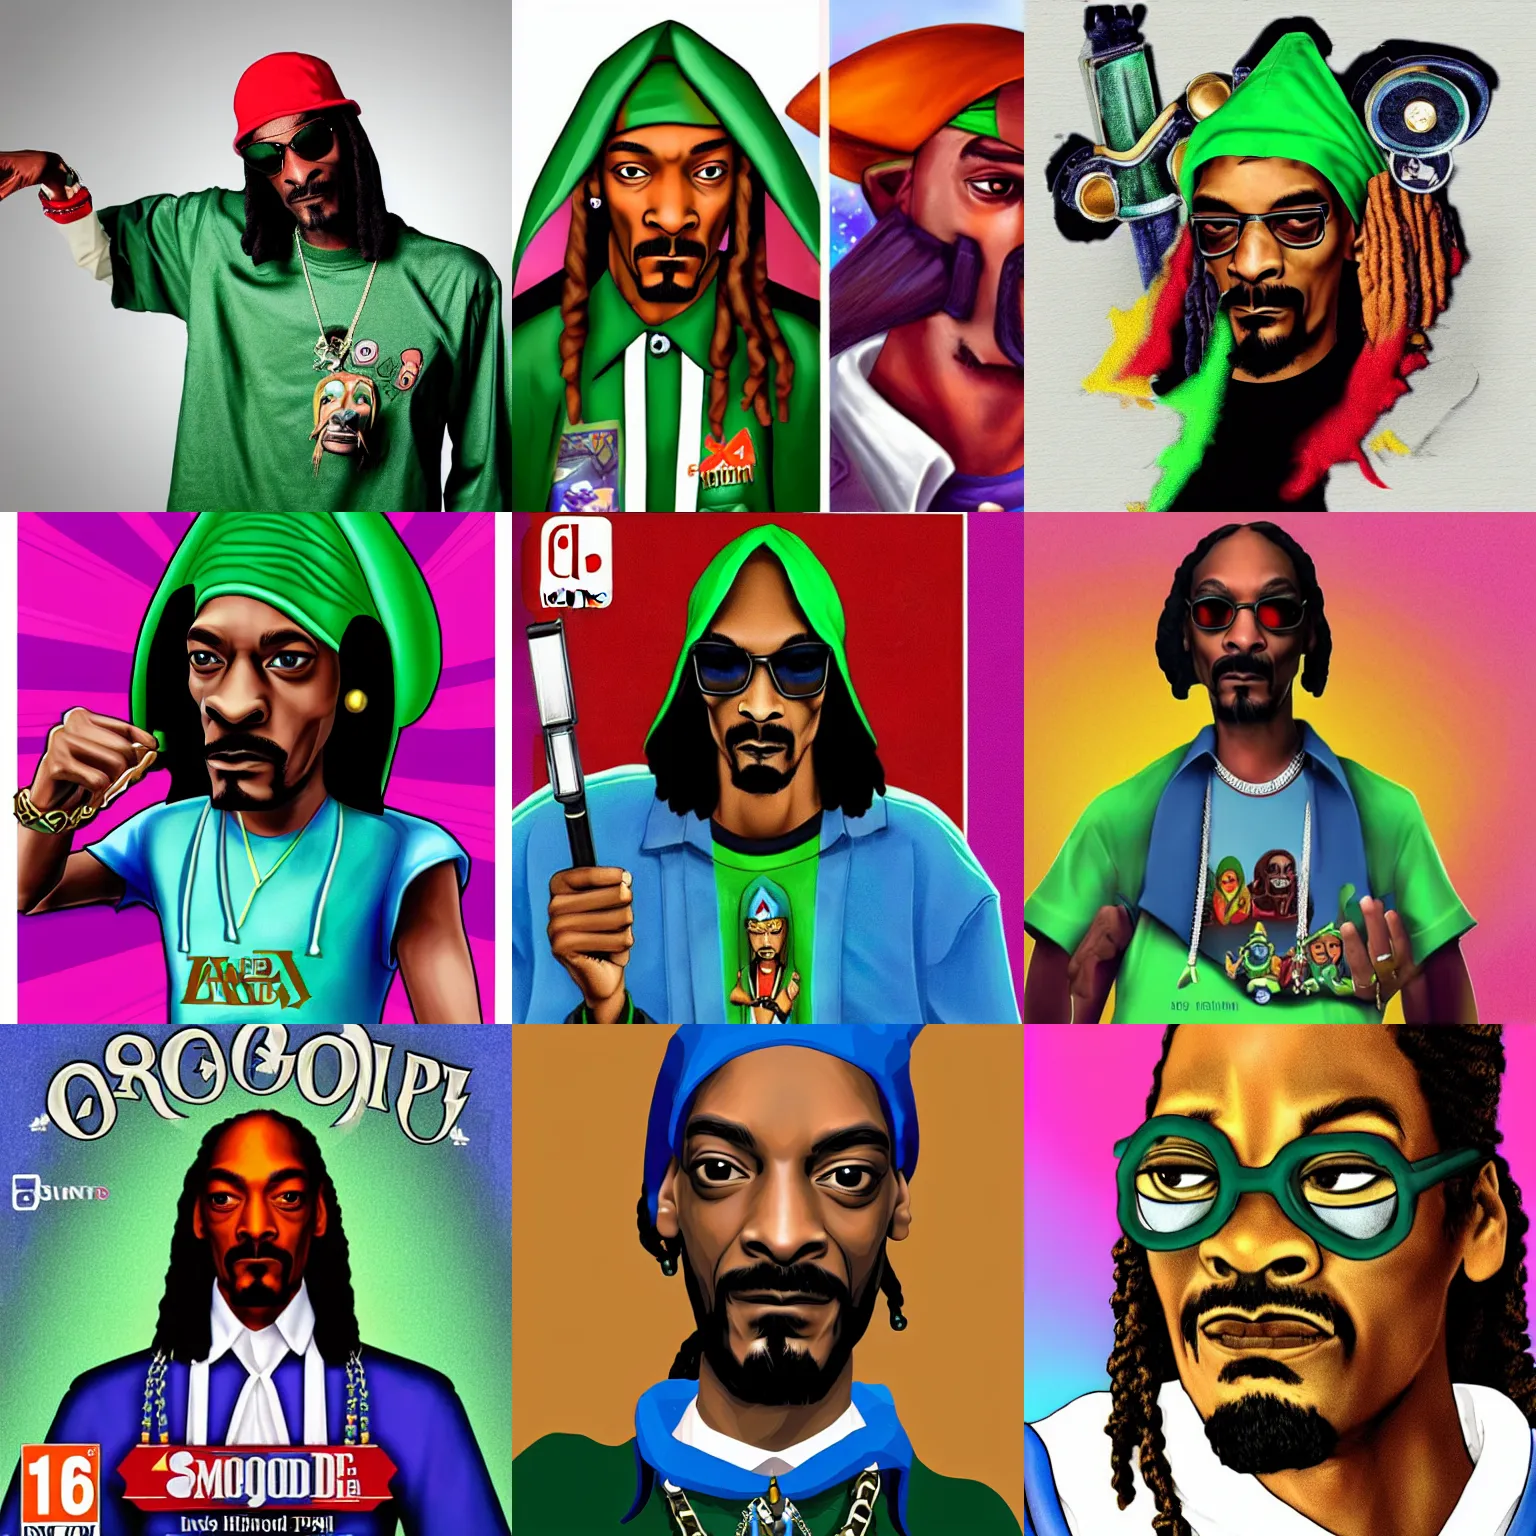 Prompt: snoop dogg in the style of ocarina of time for nintendo 64